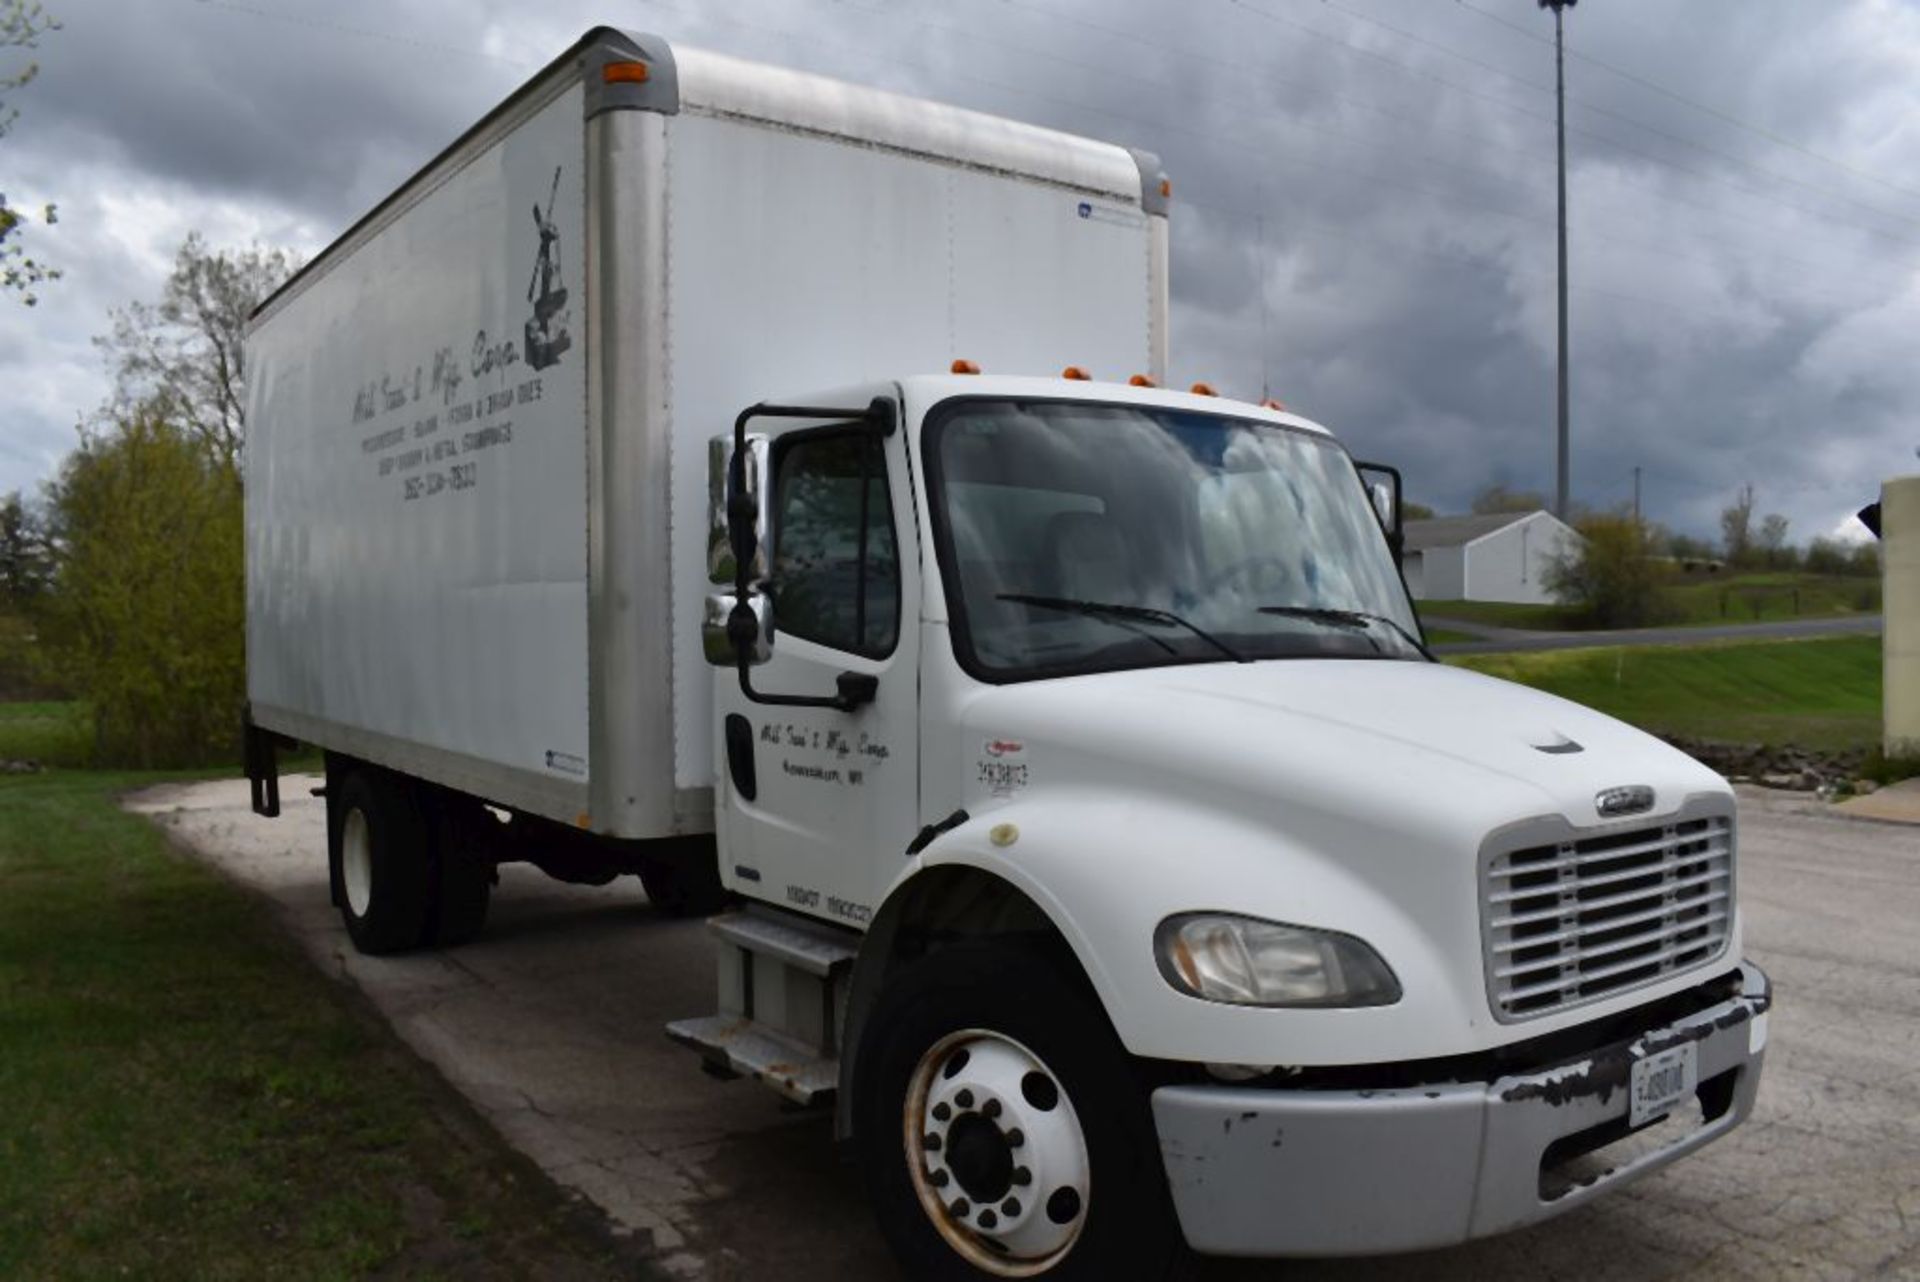 (2008) FREIGHTLINER SINGLE AXLE 20' STRAIGHT BOX VAN, MODEL: BUSINESS CLASS M2, 135,820 MILES, - Image 11 of 16